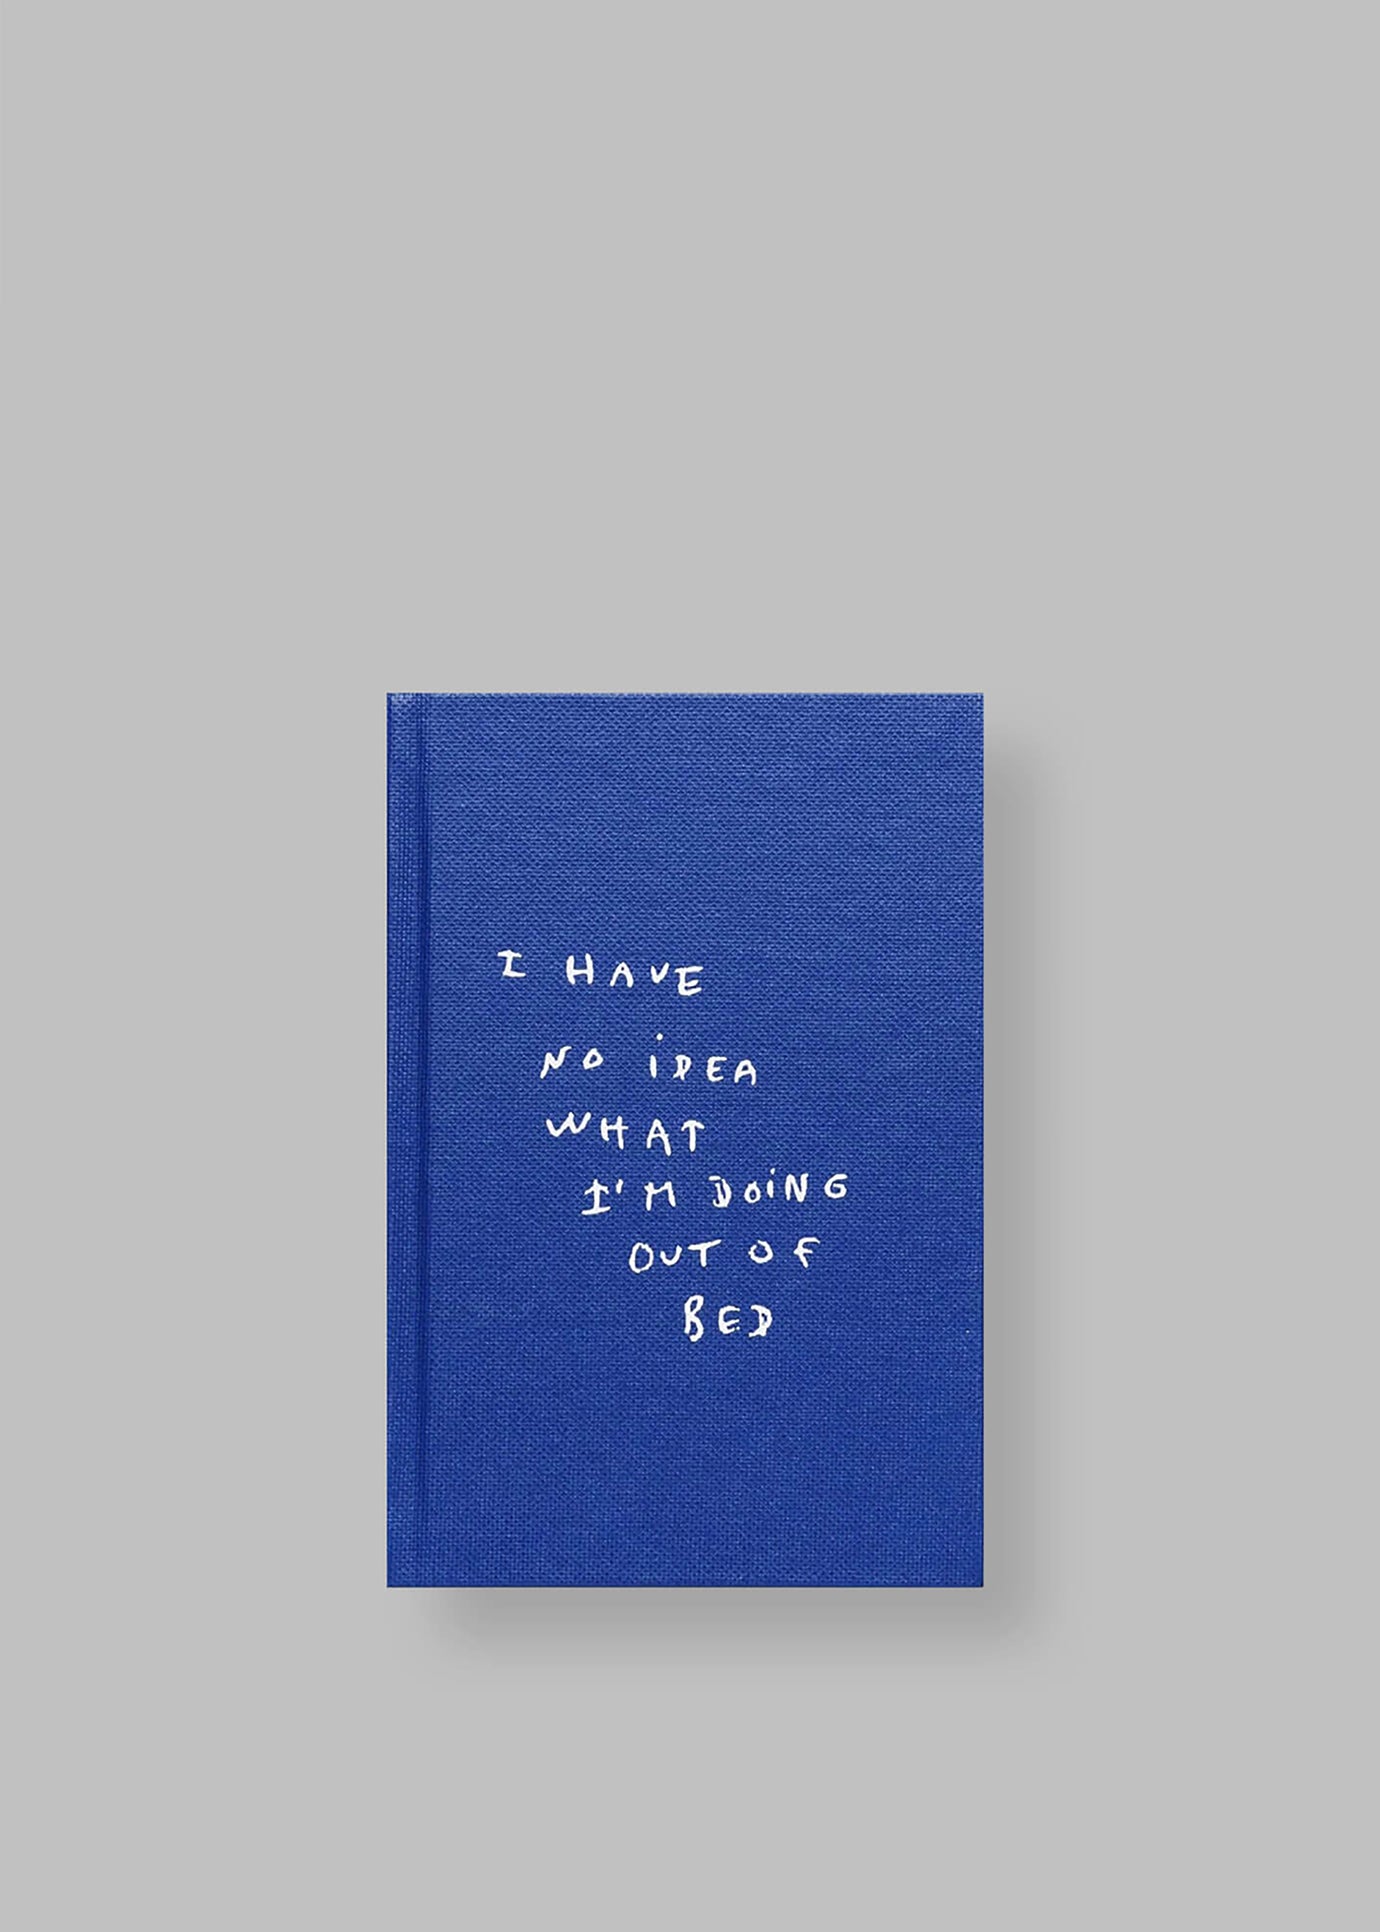 Thomas Lélu 'I Have No Idea What I'm Doing Out of Bed' Book